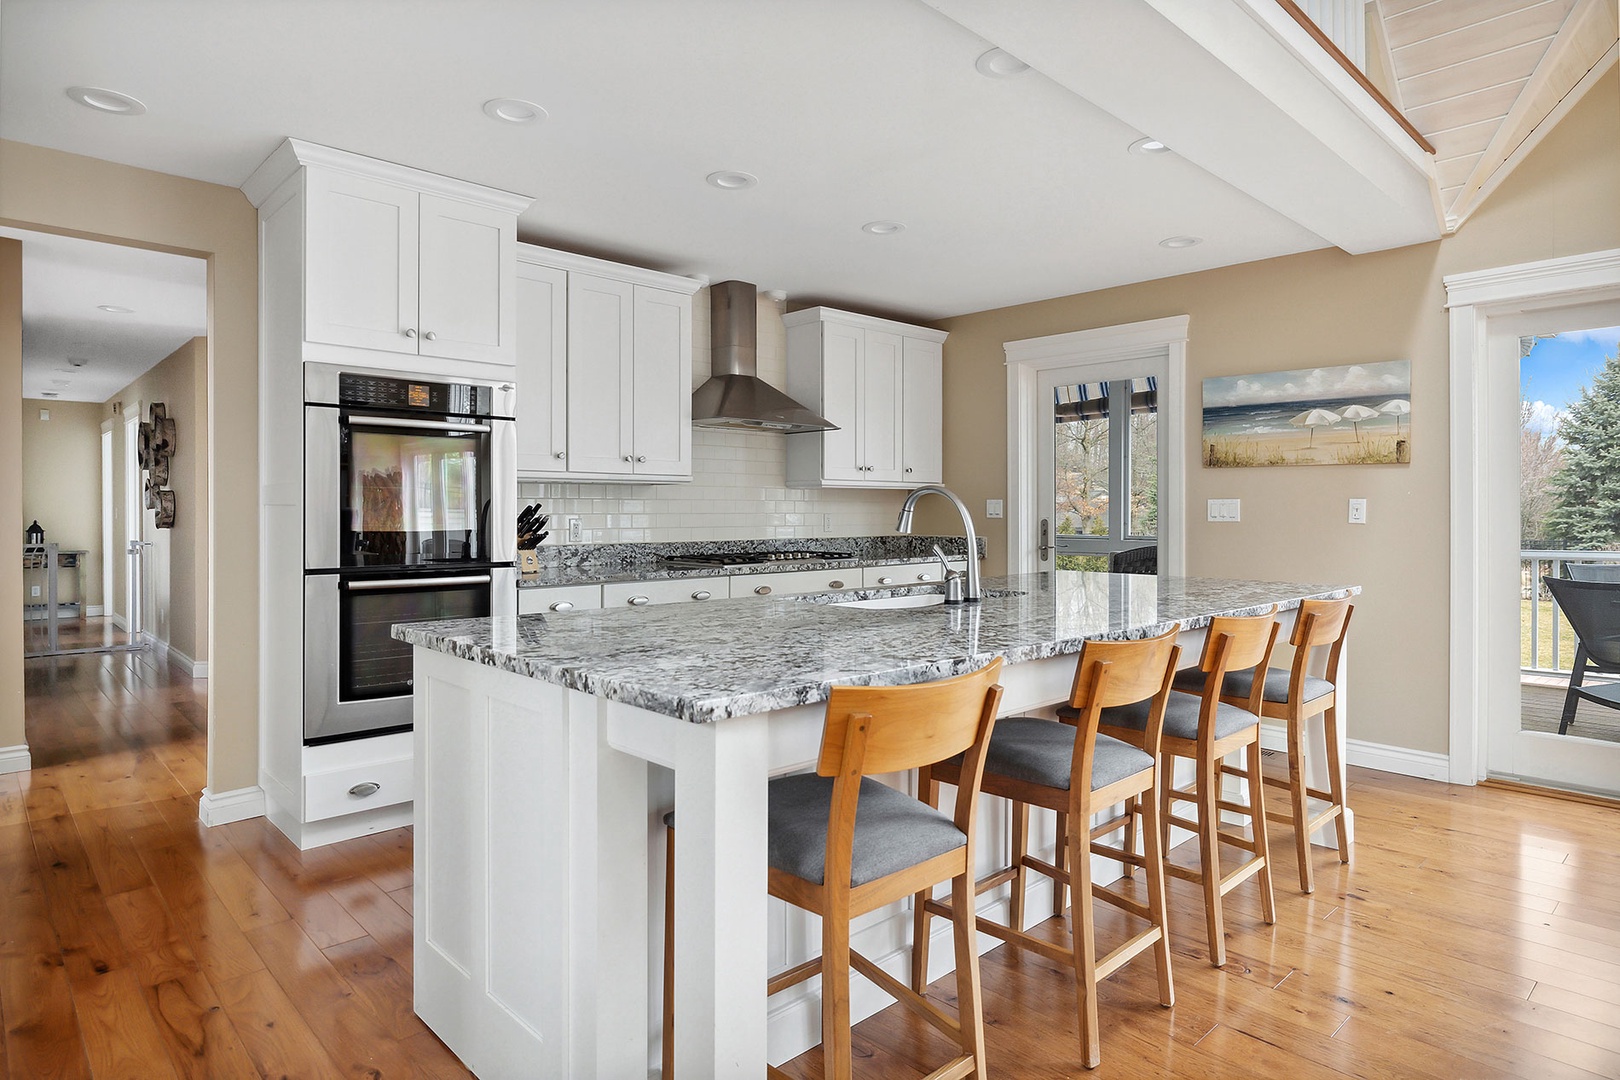 Pull up a stool and enjoy a casual meal or quick snack at the kitchen island.